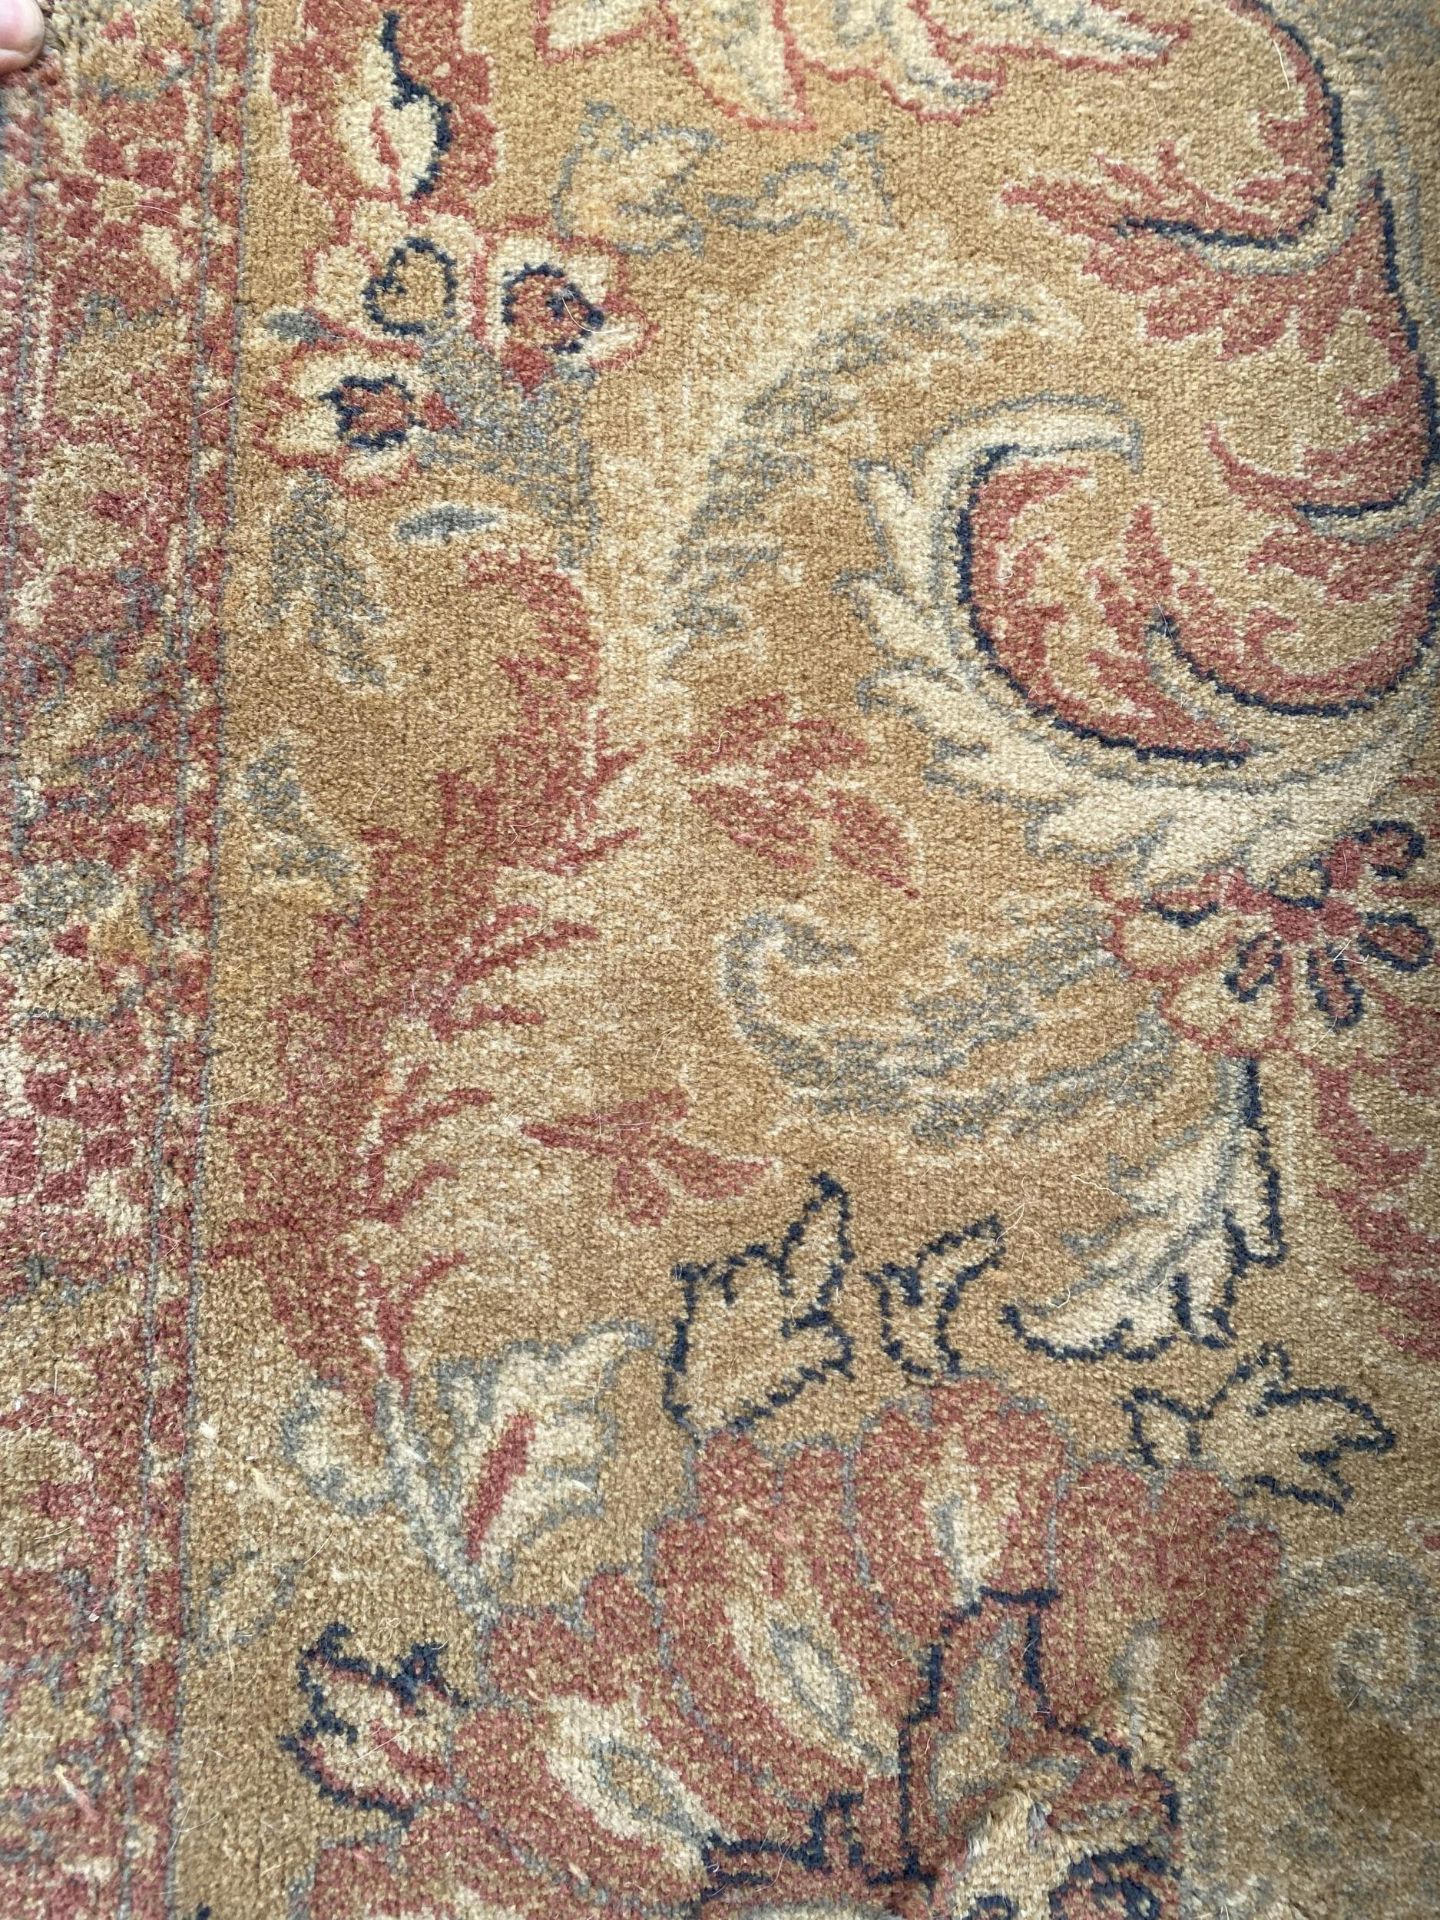 A LARGE CREAM PATTERNED RUG - Image 3 of 3